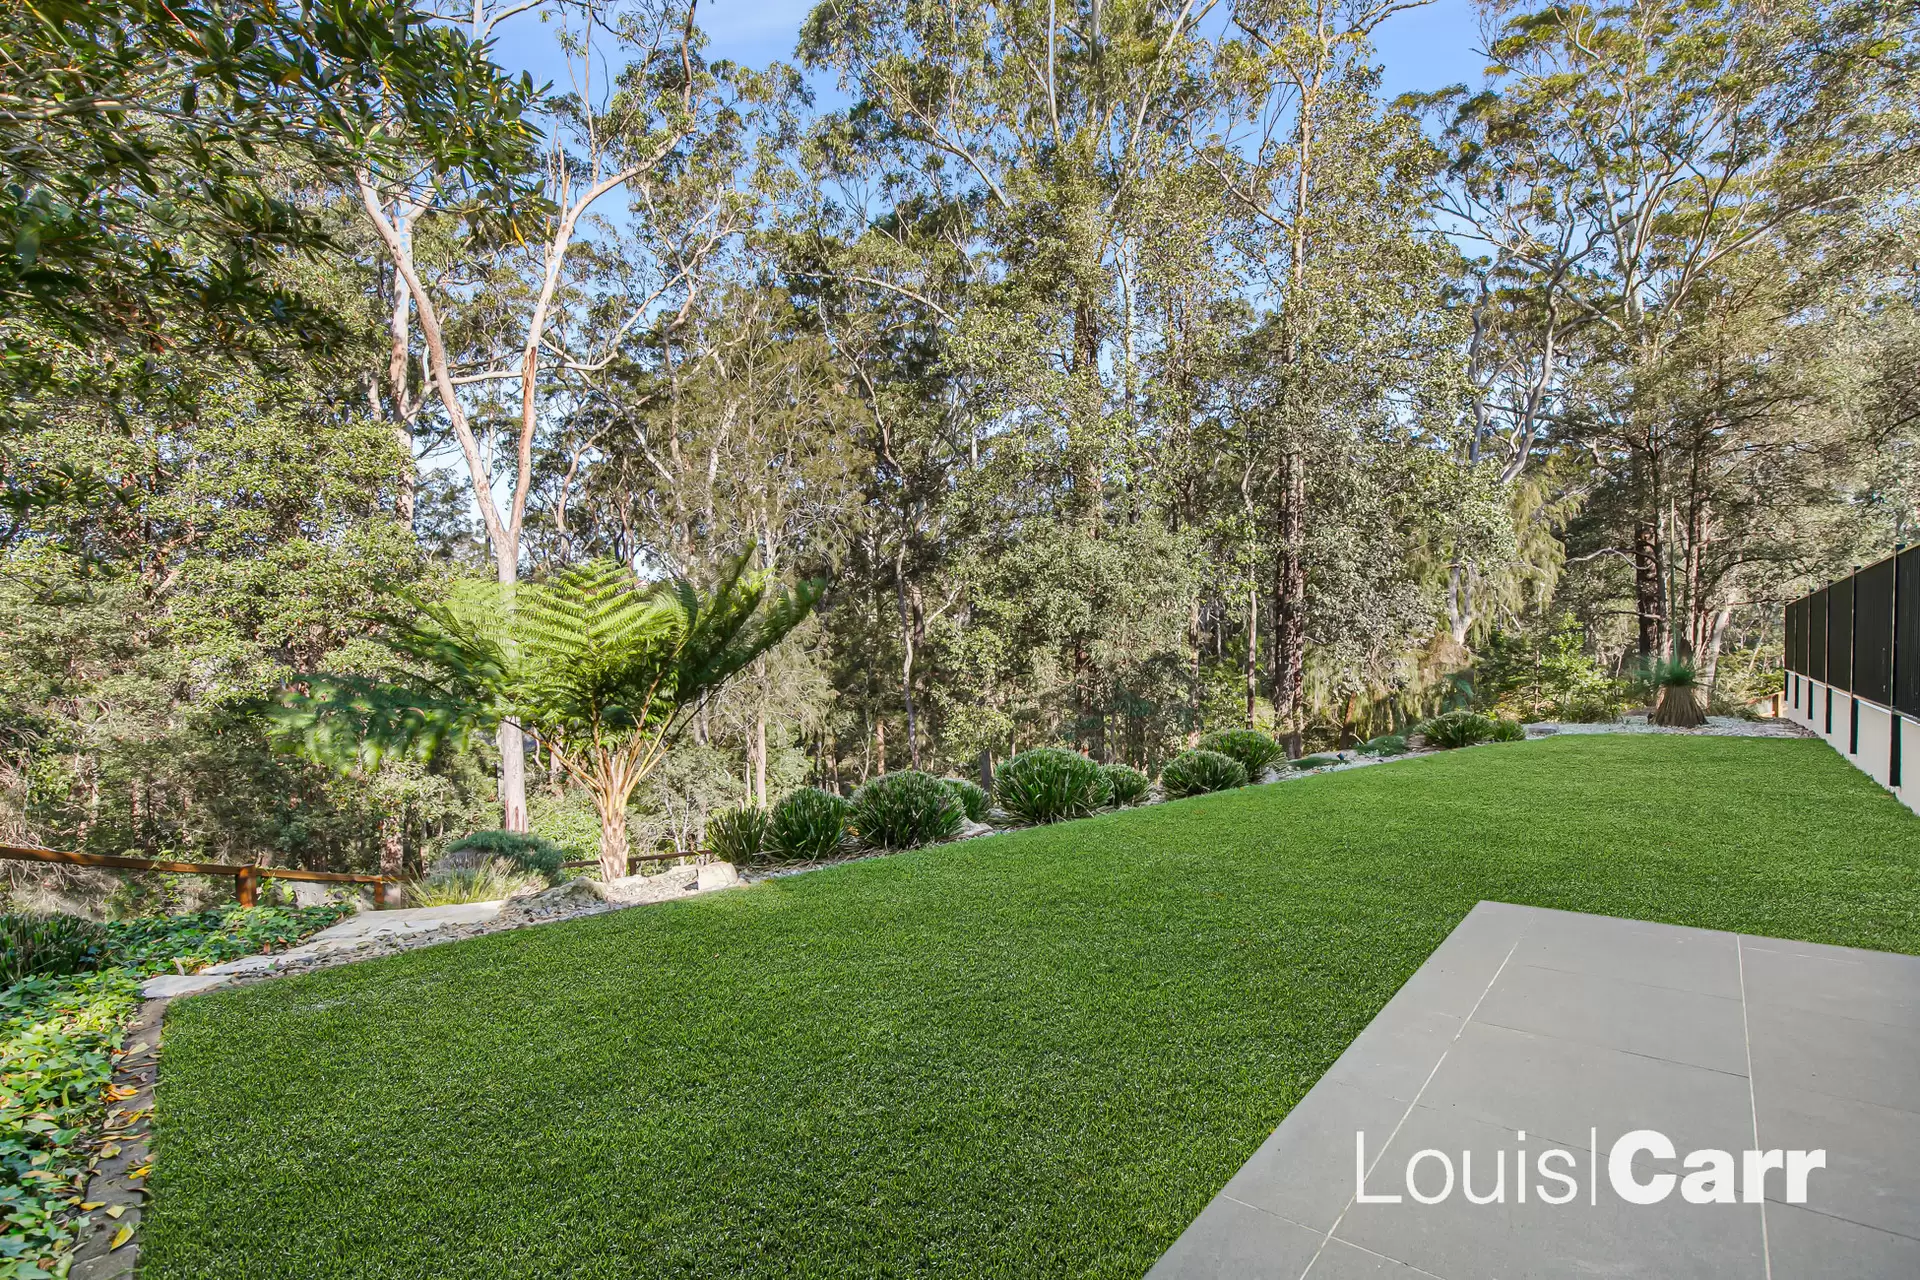 Photo #19: 10 Rodney Place, West Pennant Hills - Sold by Louis Carr Real Estate